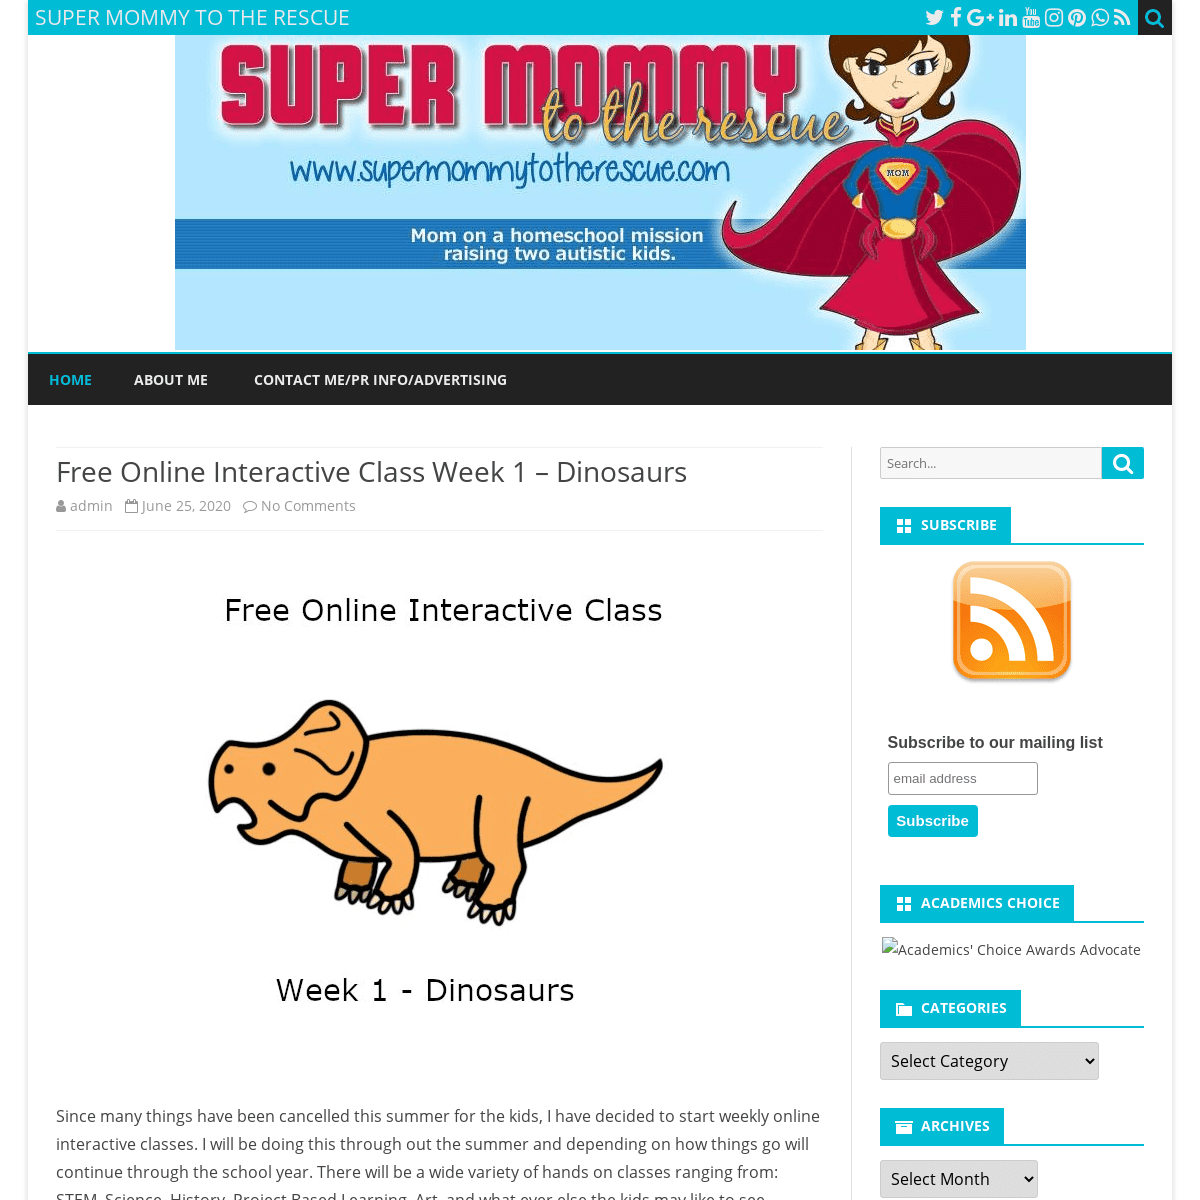 A complete backup of https://supermommytotherescue.com